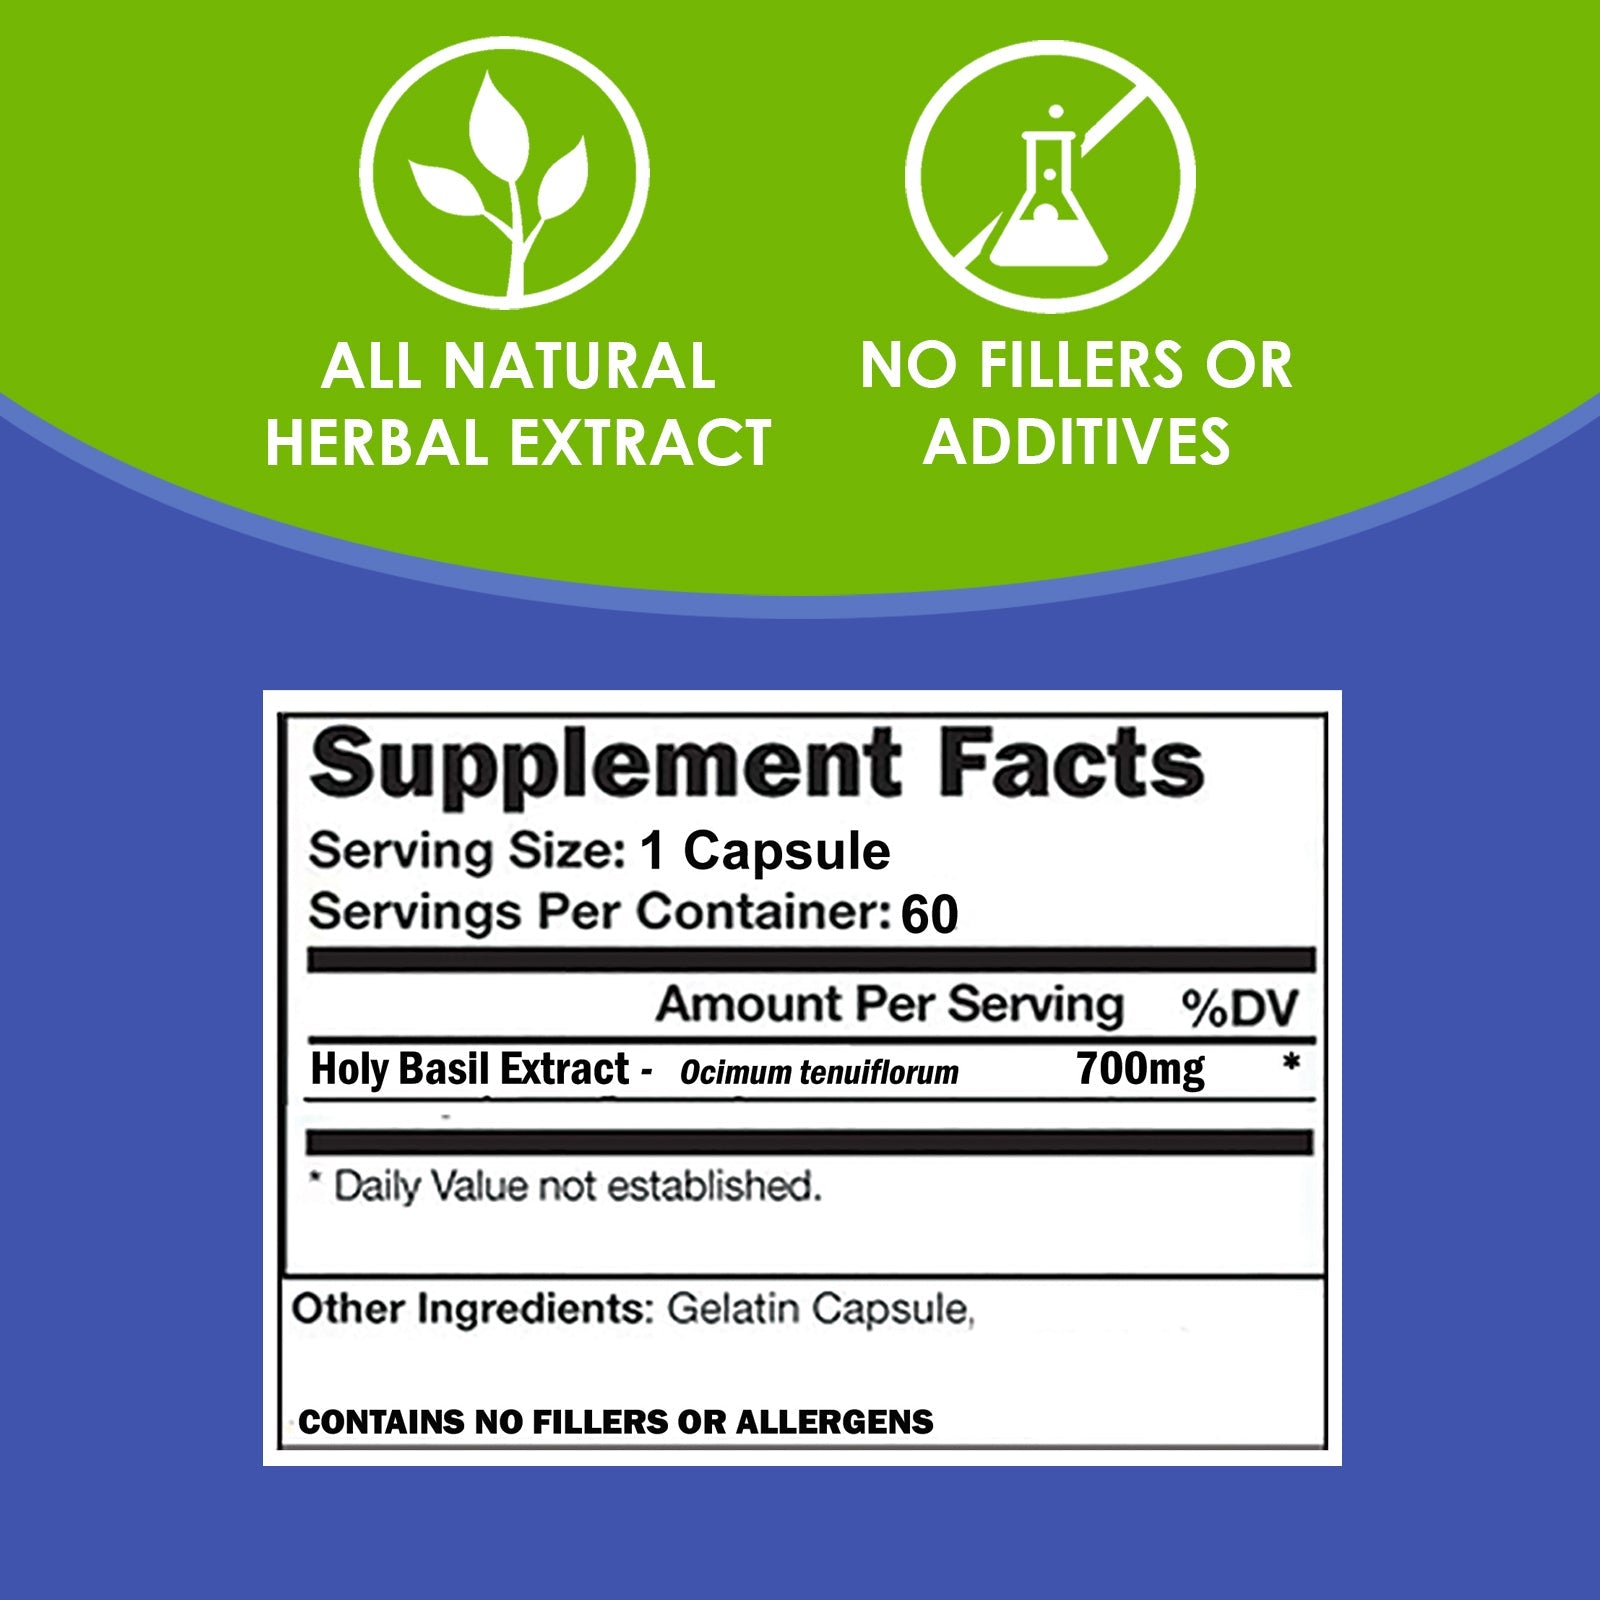 VH Nutrition HOLY BASIL | Herbal Adaptogen Support* | Improve Well-Being and Vitality | 700mg Proprietary Formula | 60 Capsules